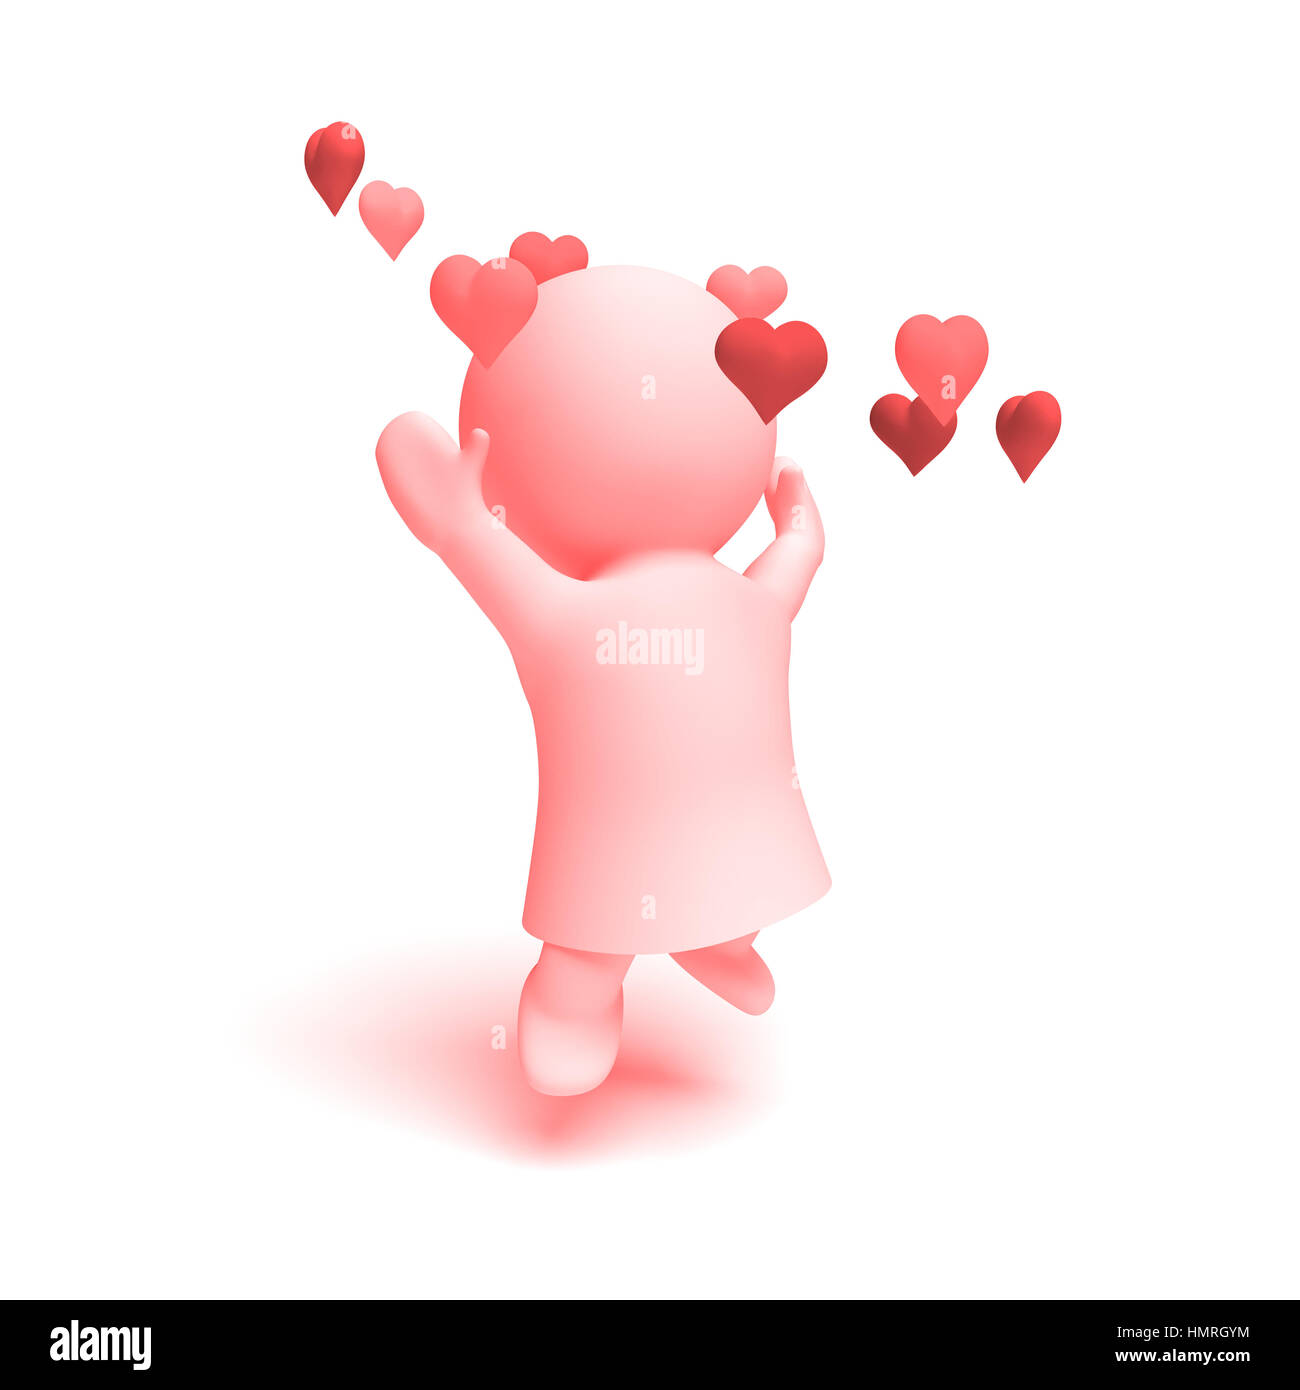 cute human 3d character in shades of pink wearing a dress cheering happily in a ring of hearts  (3D illustration isolated on a white background) Stock Photo